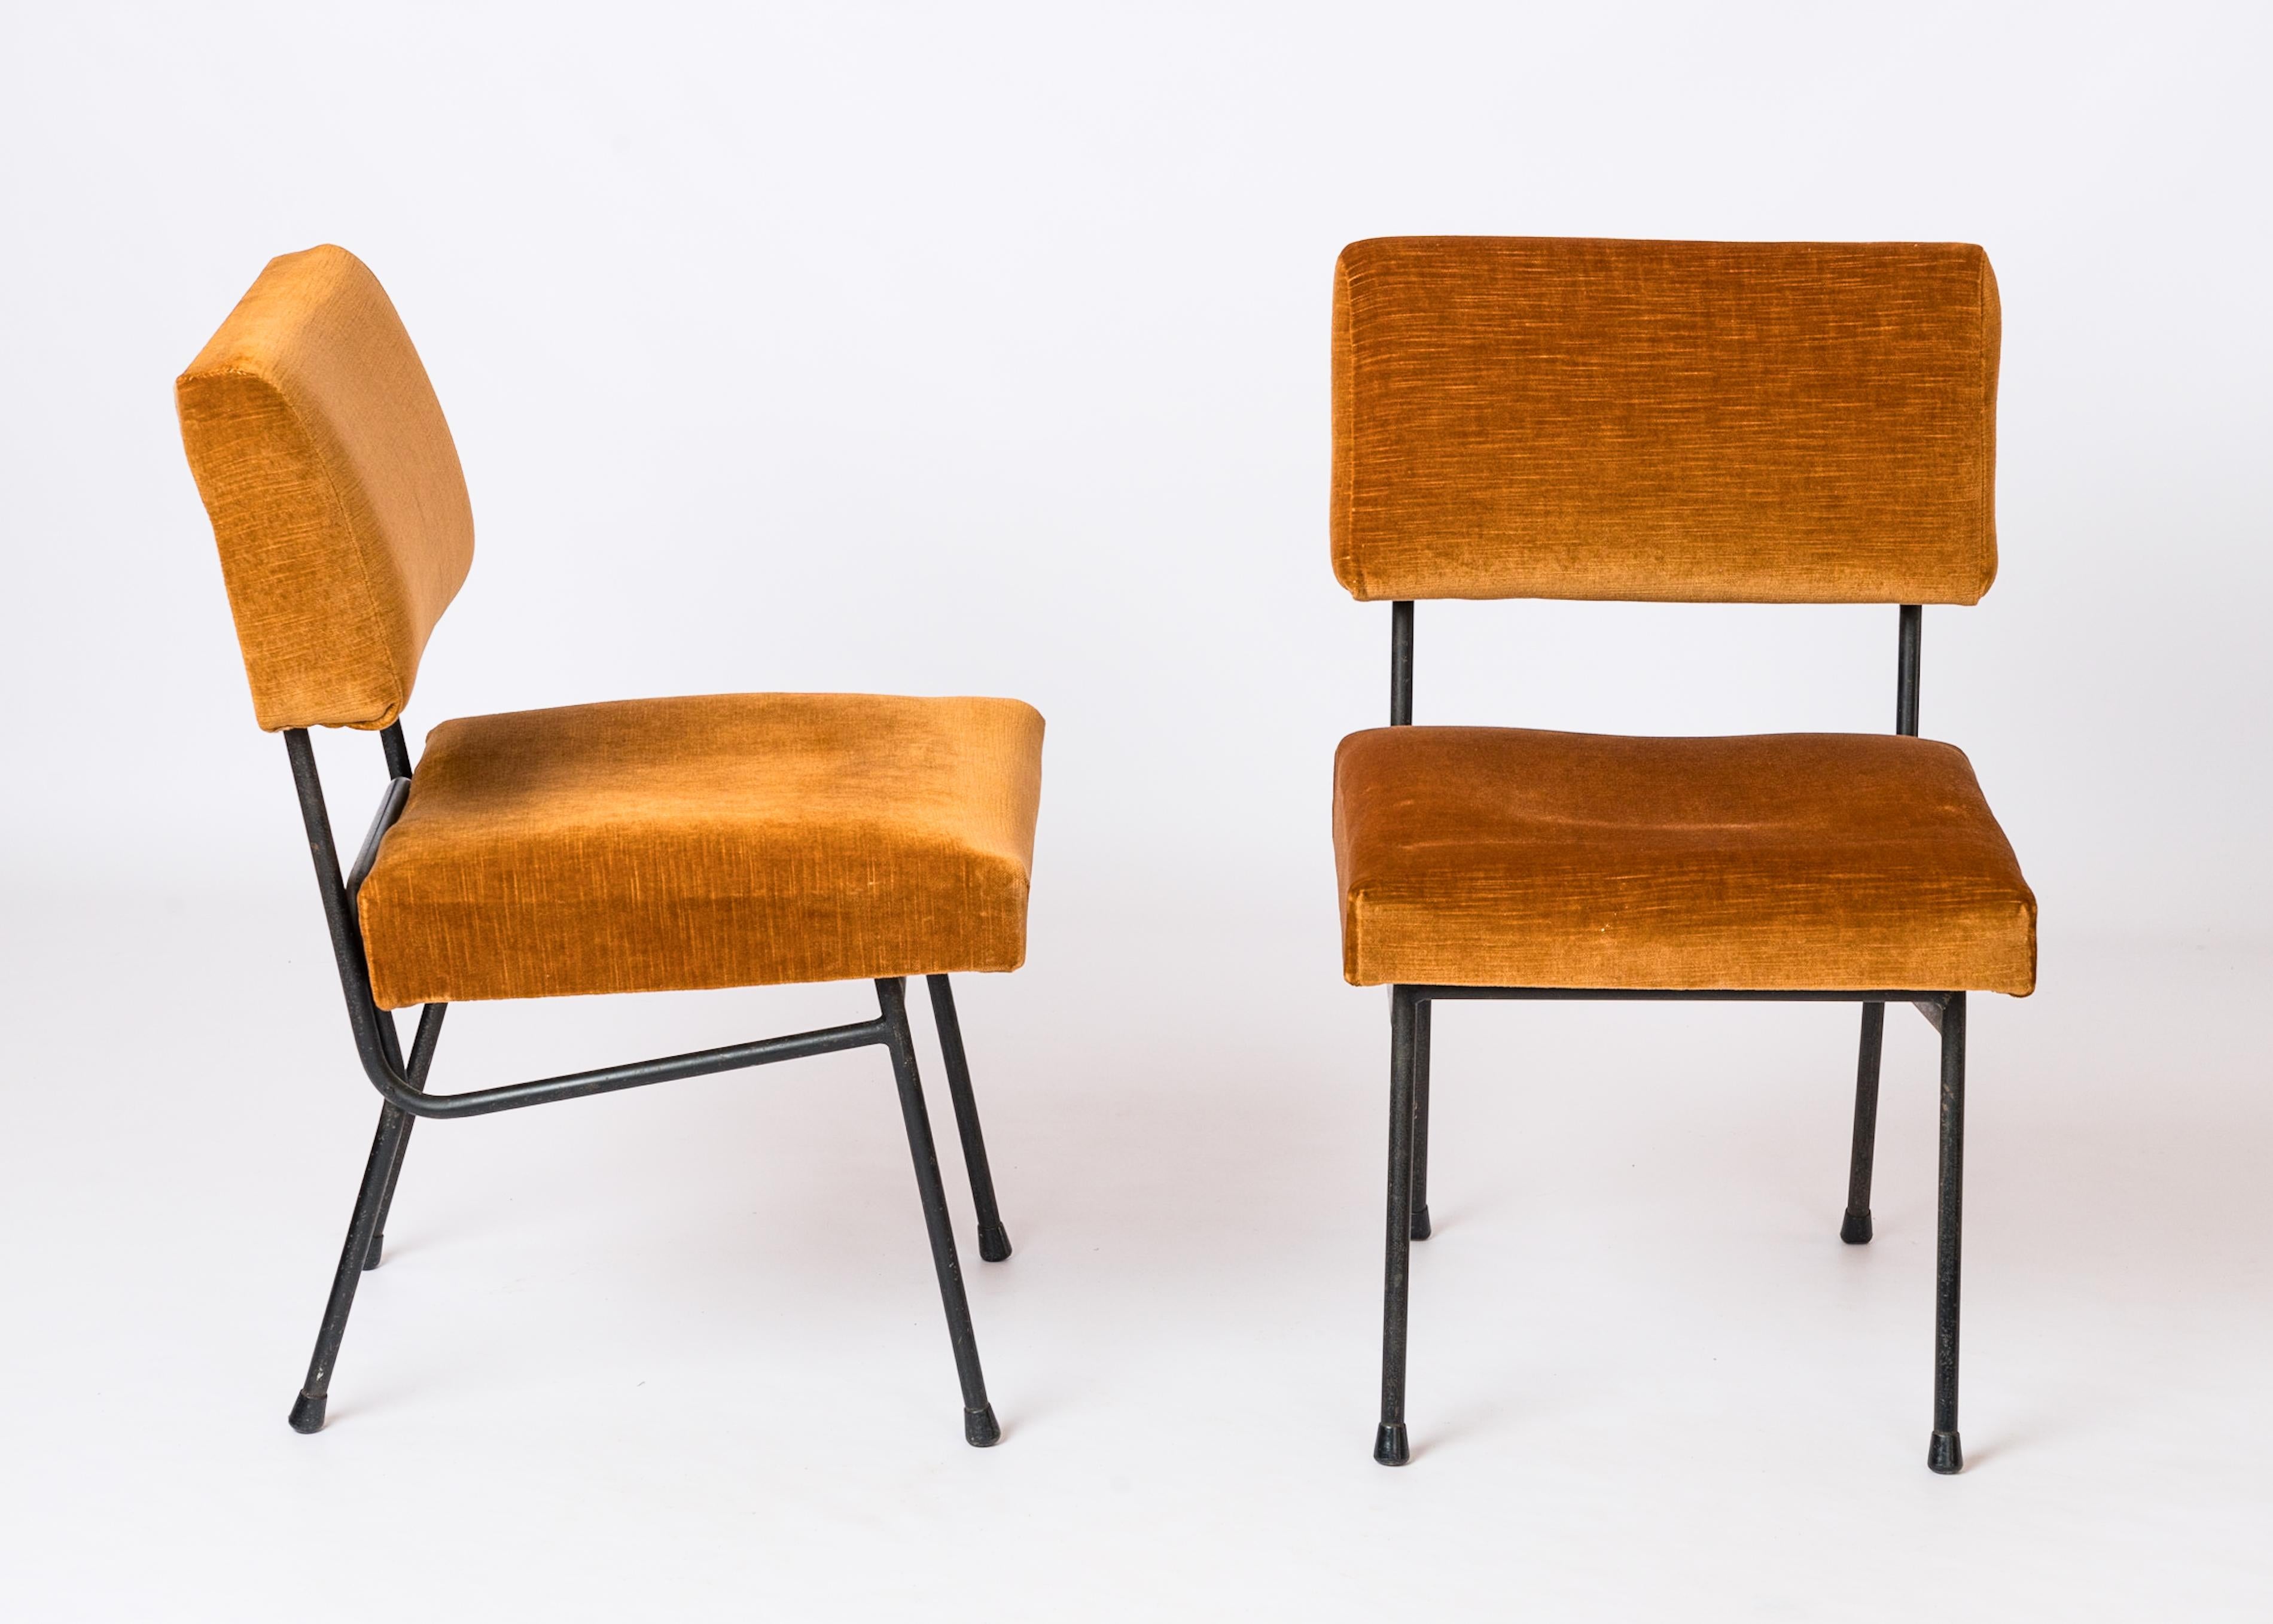 French Pair of Marigold Velvet Adjustable Chairs att. Pierre Guariche - France 1960's For Sale